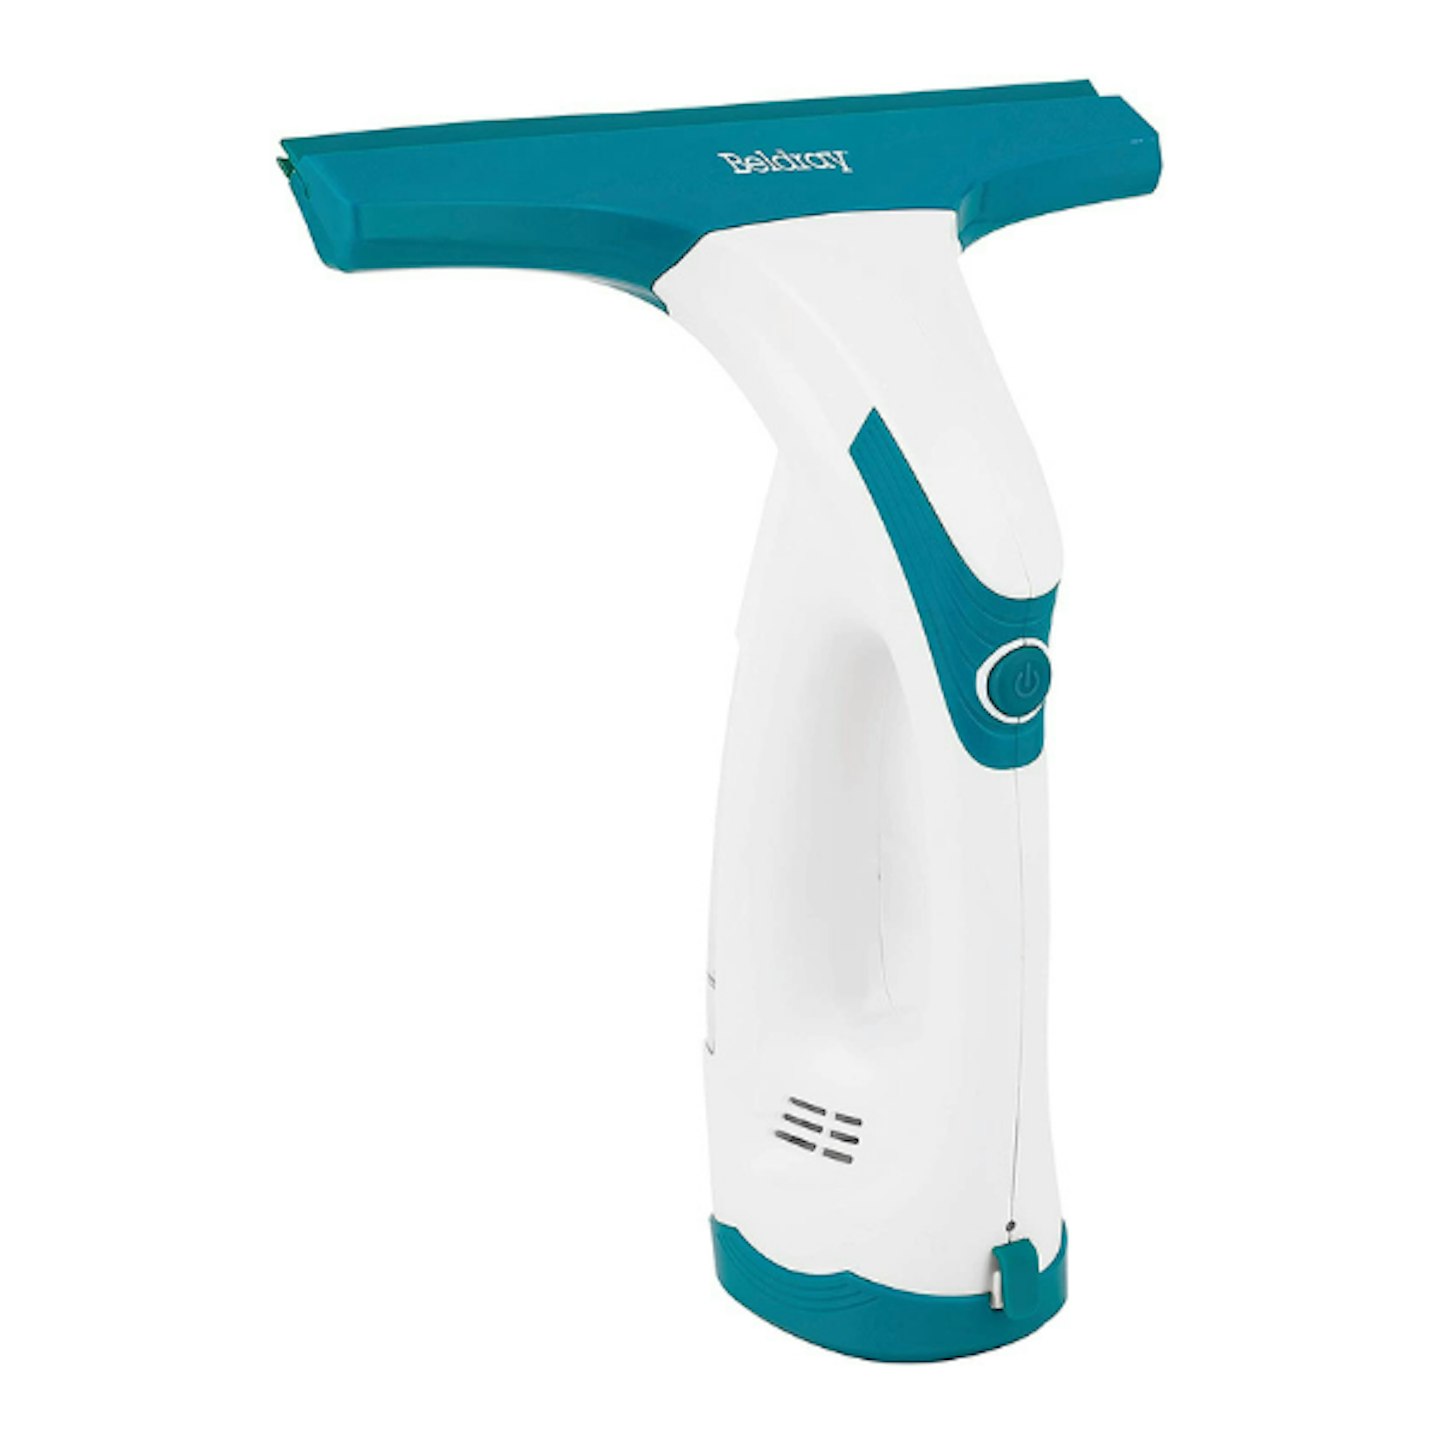 A Beldray Cordless Rechargeable Window Vacuum